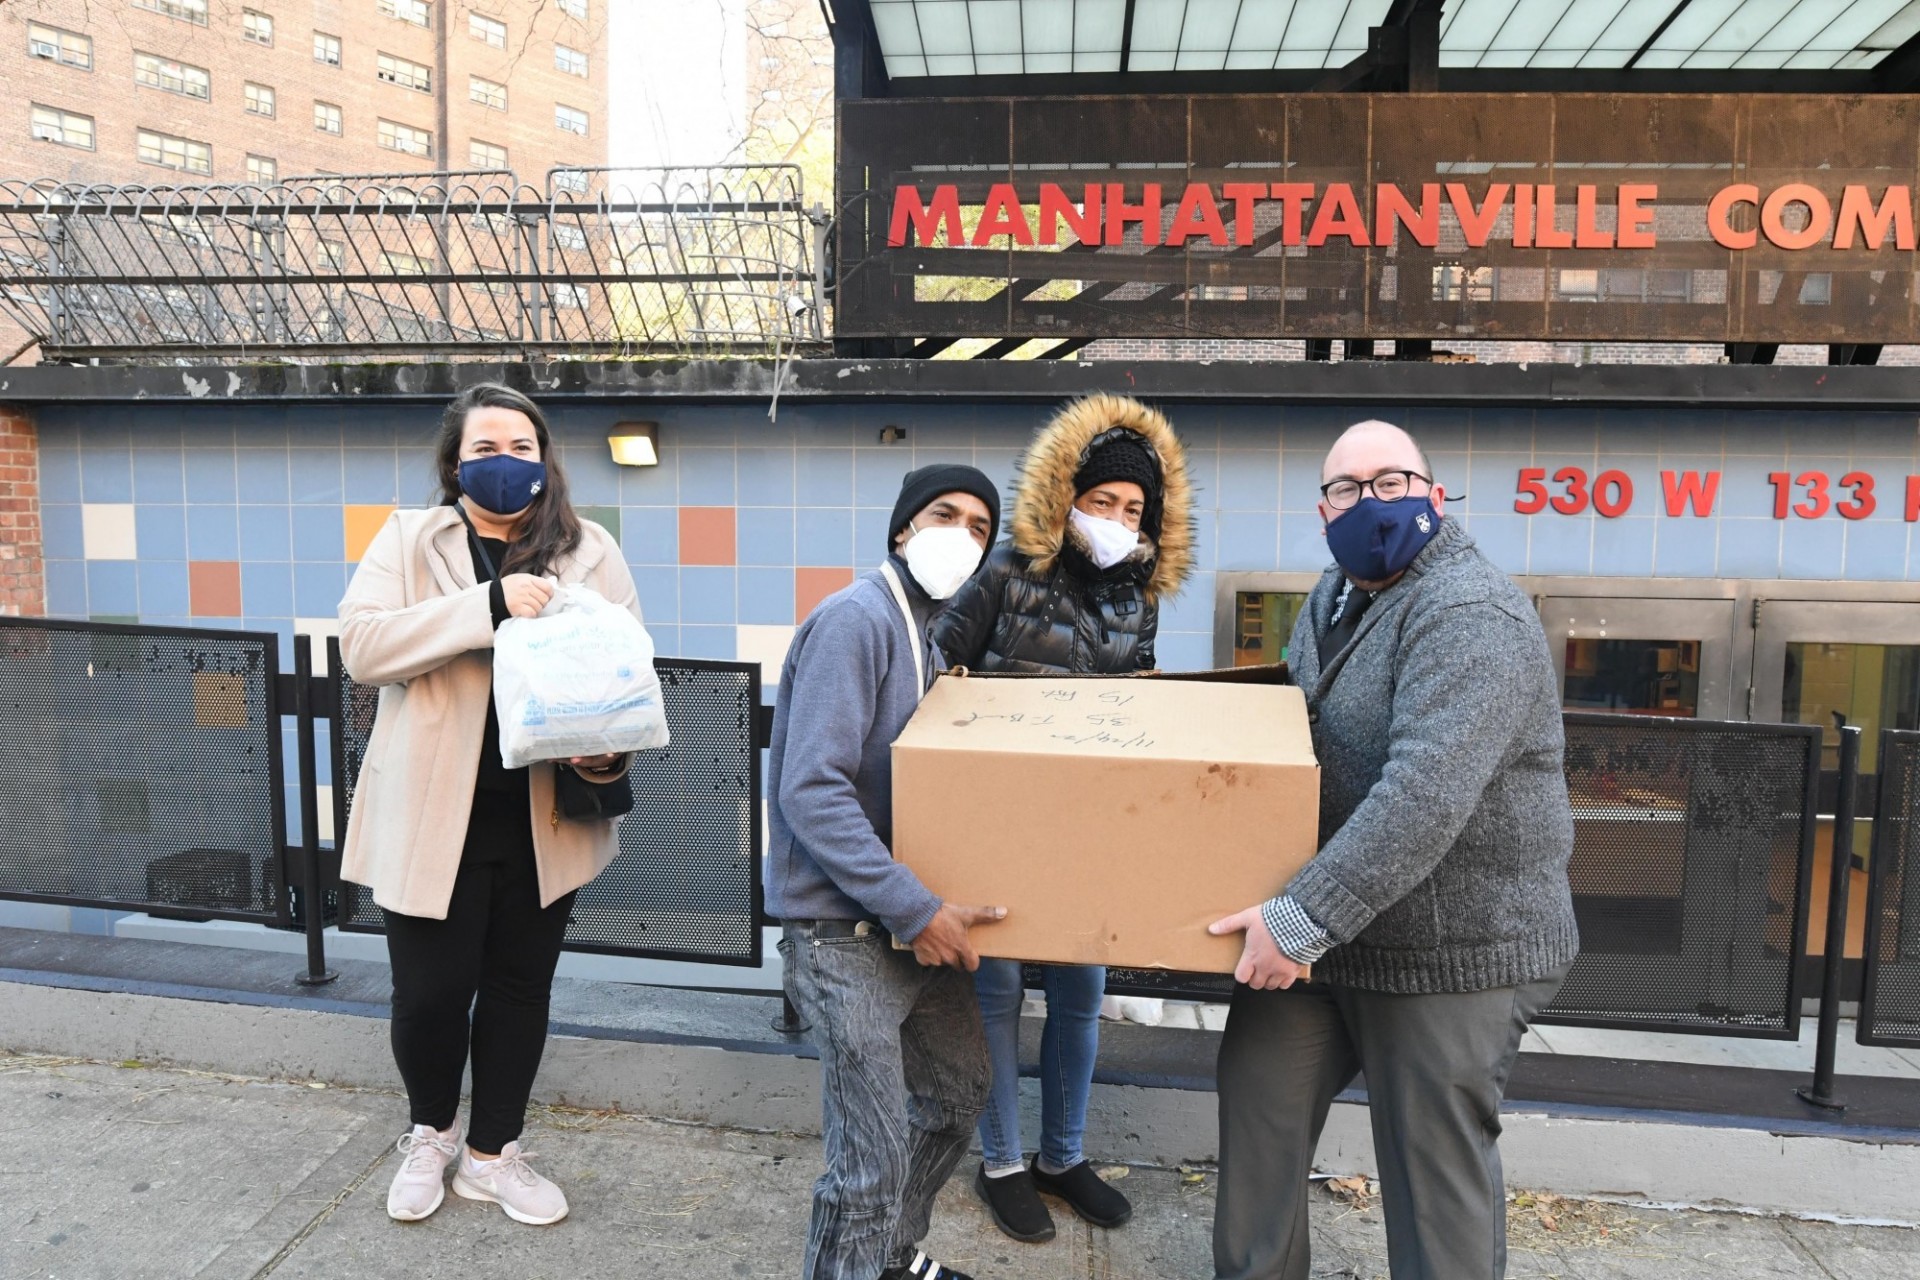 One woman with a face mask carrying bag with food and three (two men and one woman) with a face mask carrying box with meals.